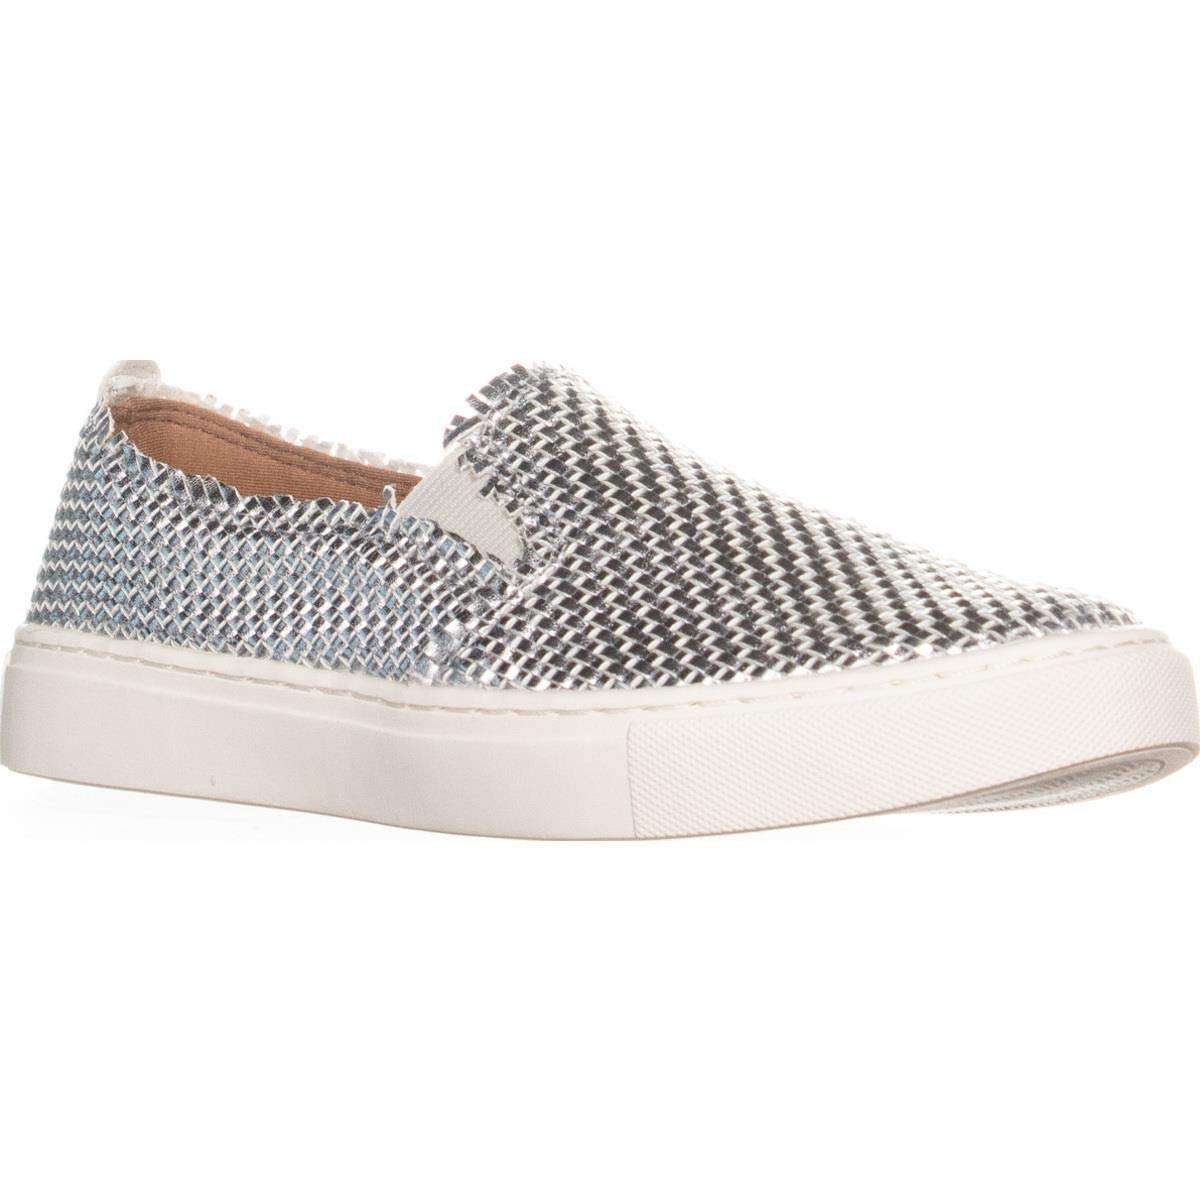 Indigo Rd. Womens Kicky Low Top Slip On Fashion Sneakers, Silver, Size ...